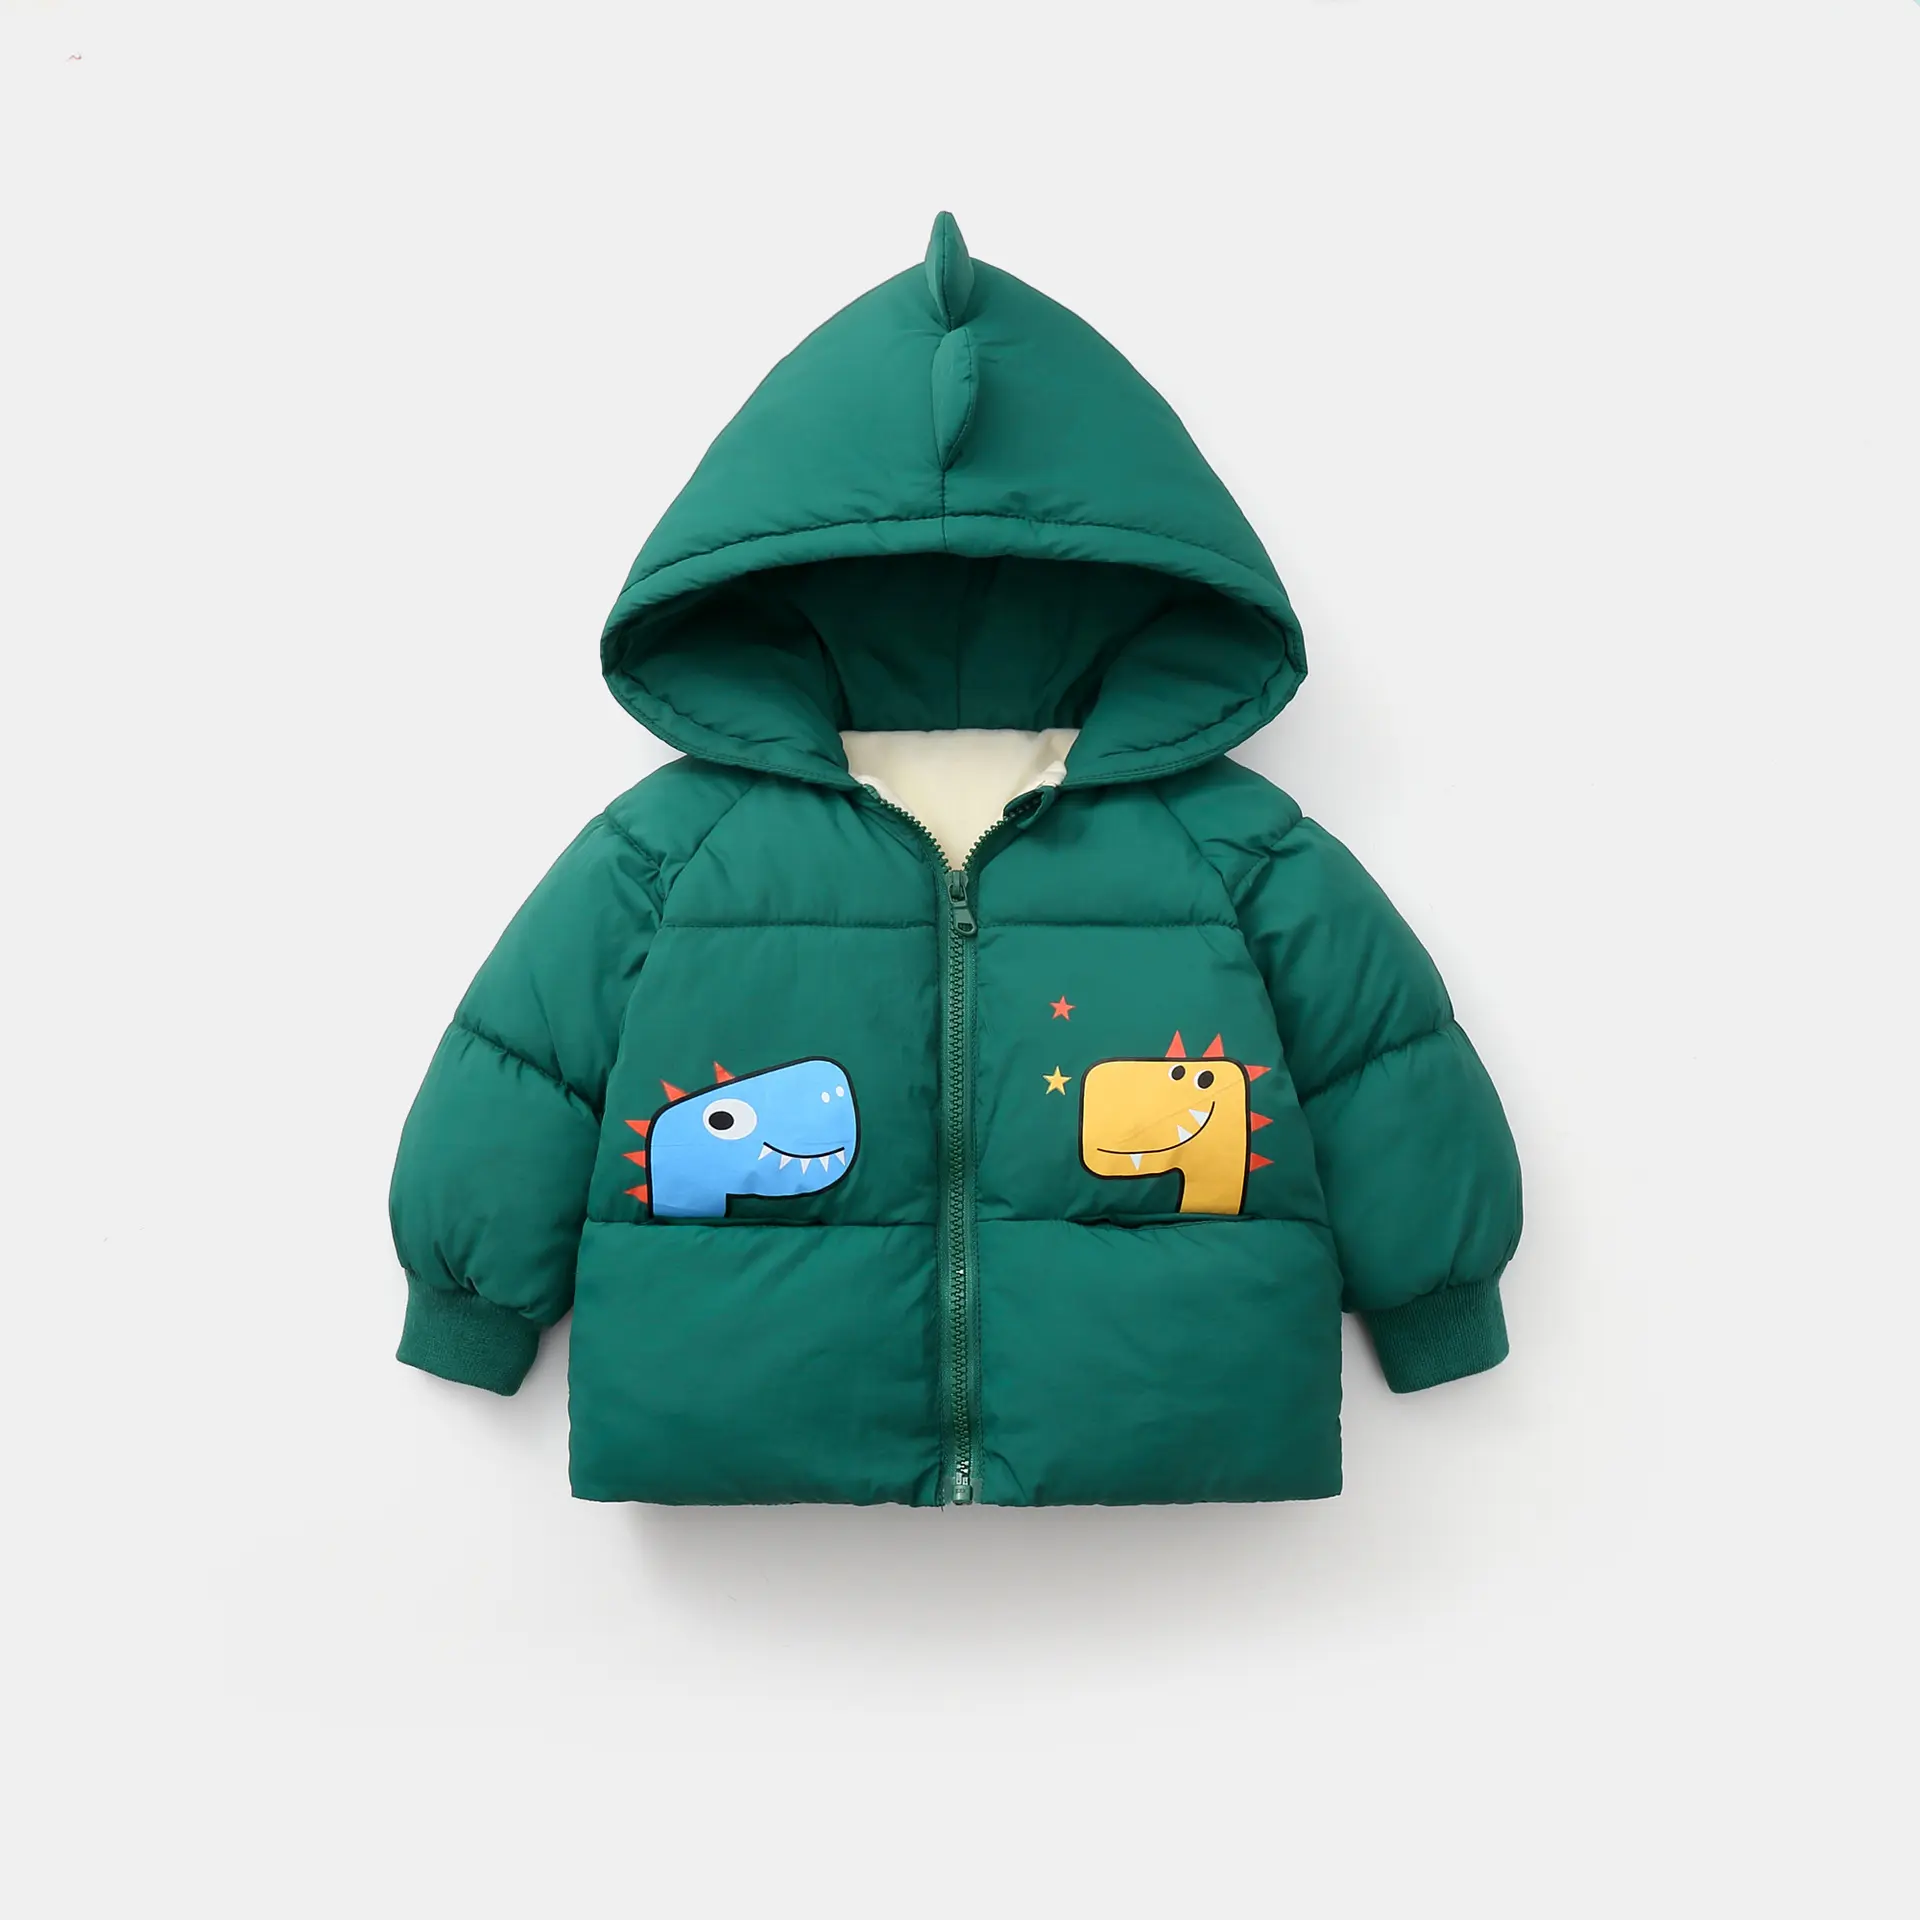 Wholesale 100% poly fiber quilted hooded warm winter baby girls boys outwears coat jackets for children